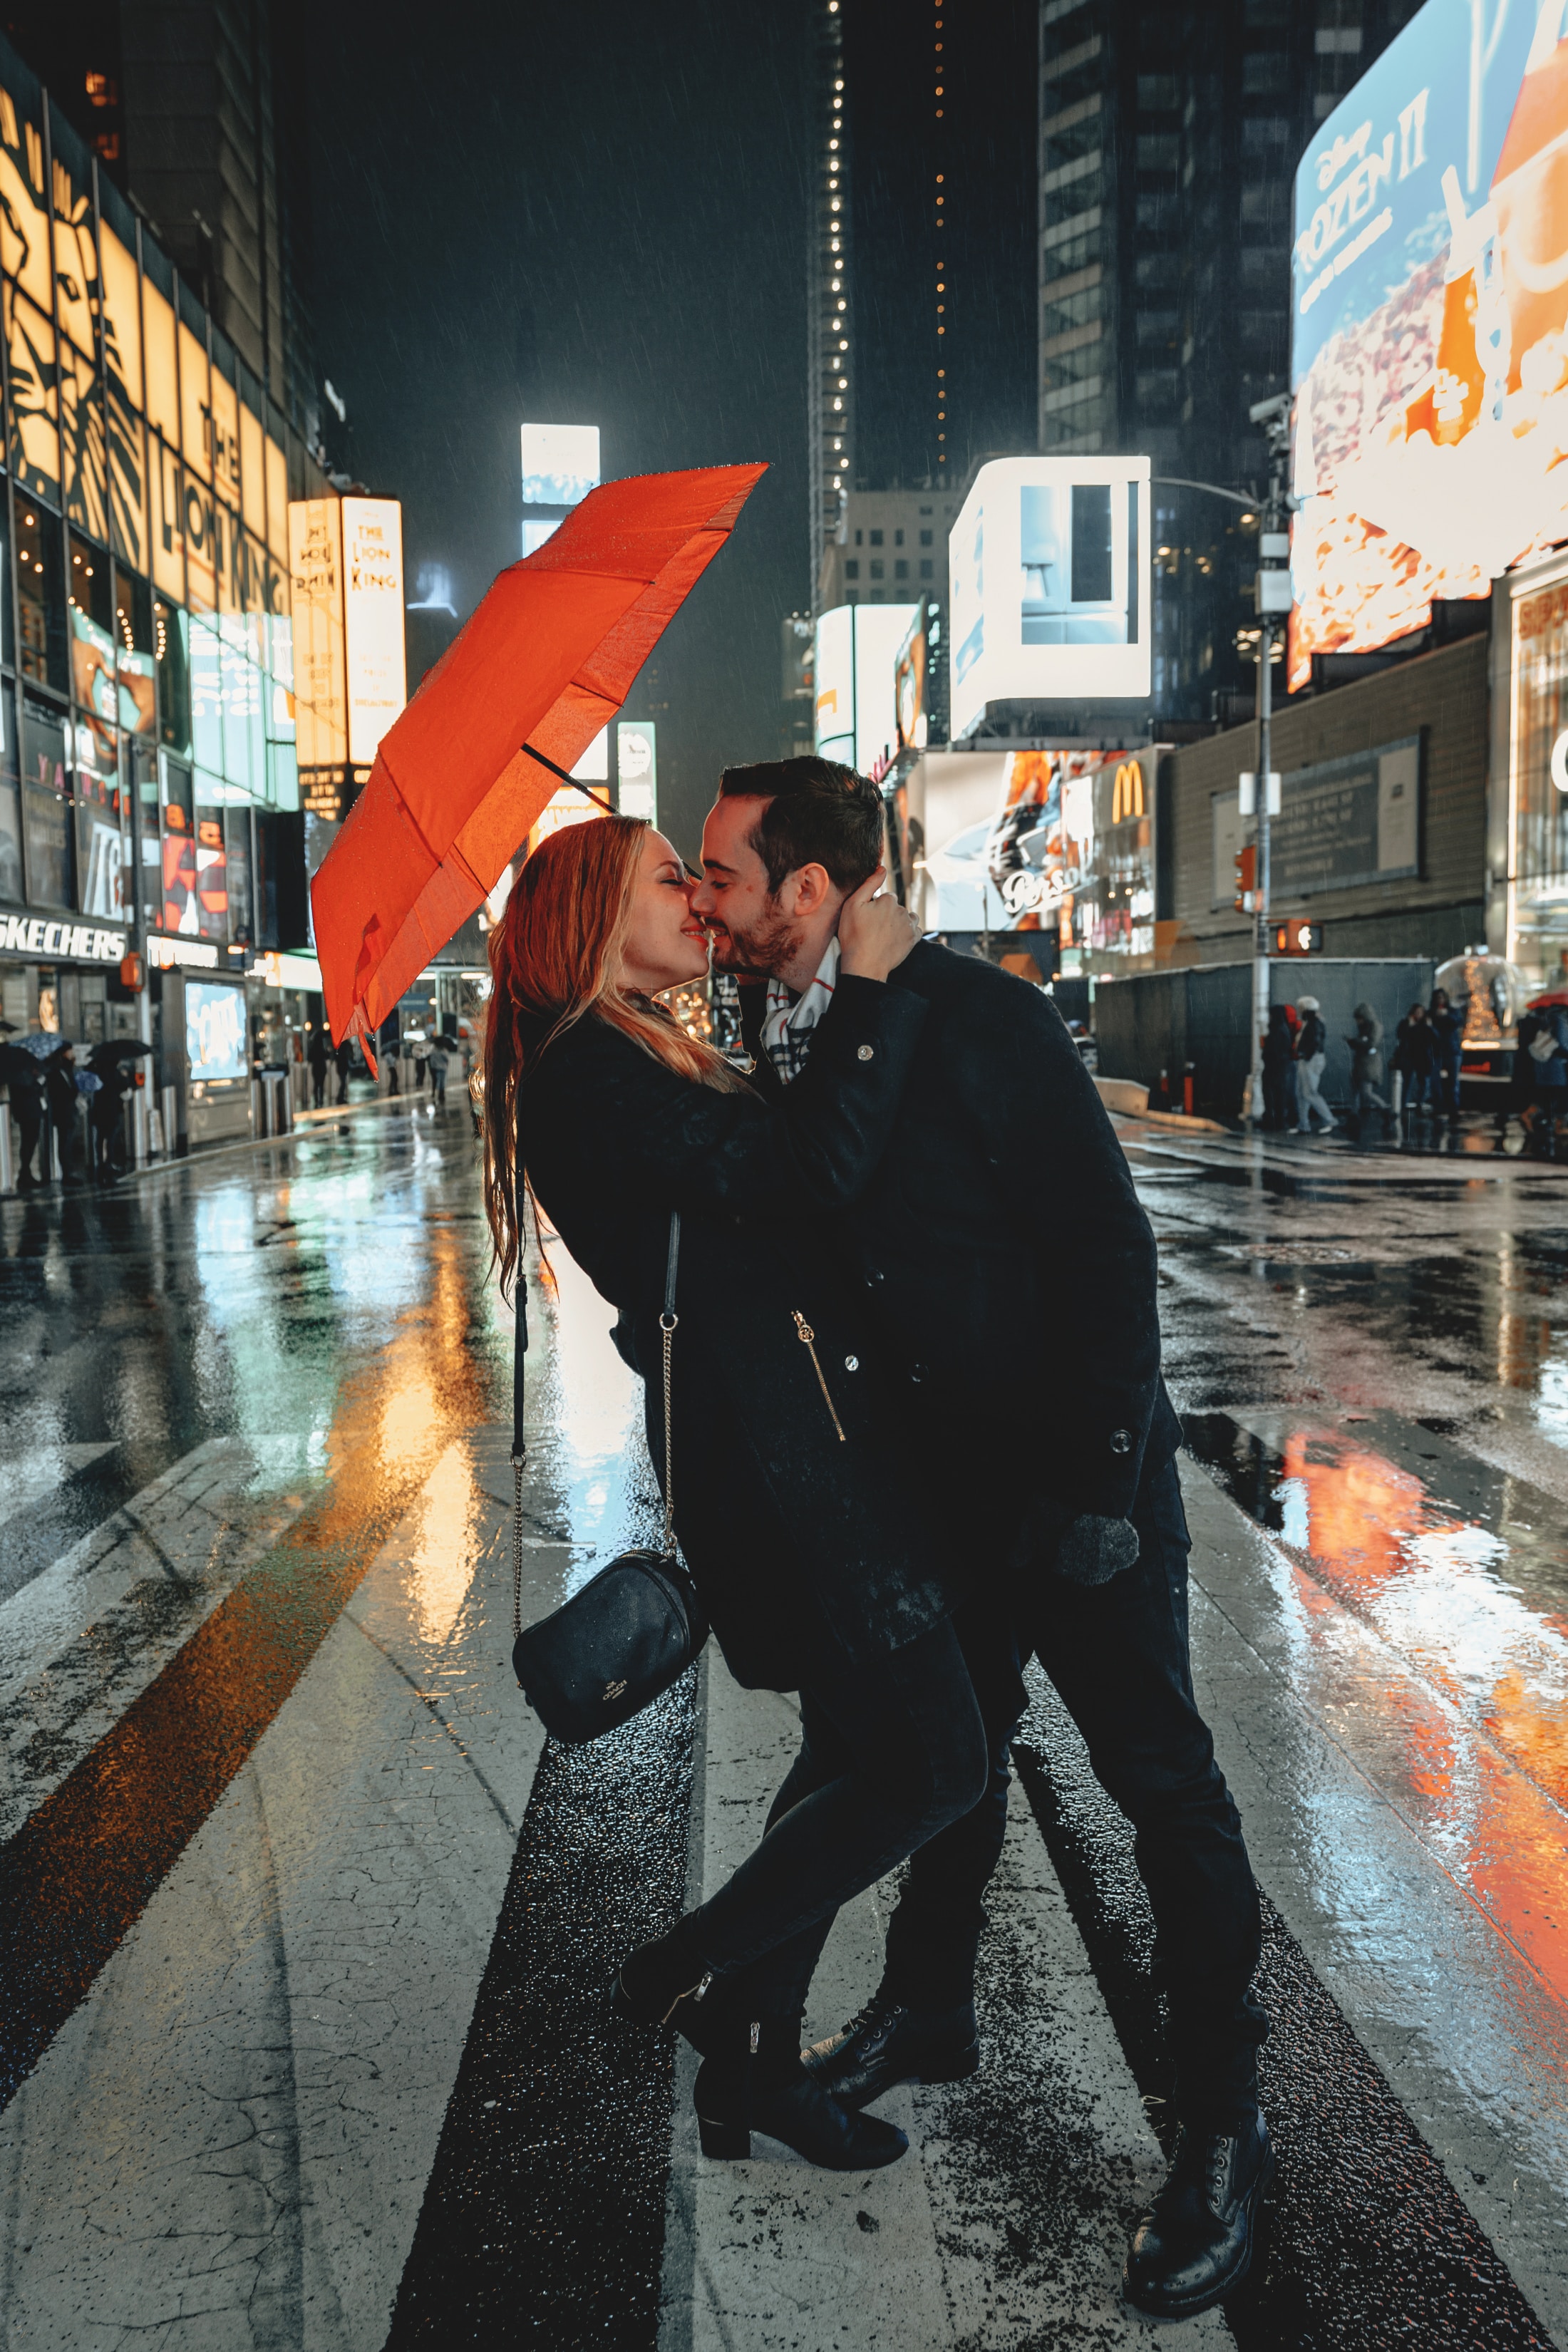 A couple kissing under an umbrella in Times Square. | Source: Unsplash